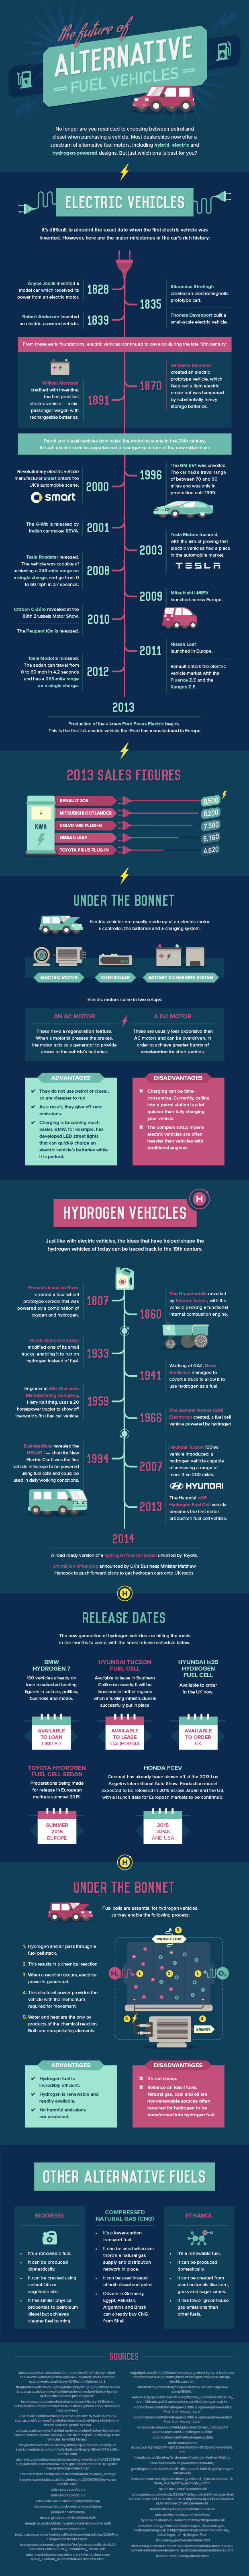 The Future of Alternative Fuels - An Infographic A Mum Reviews